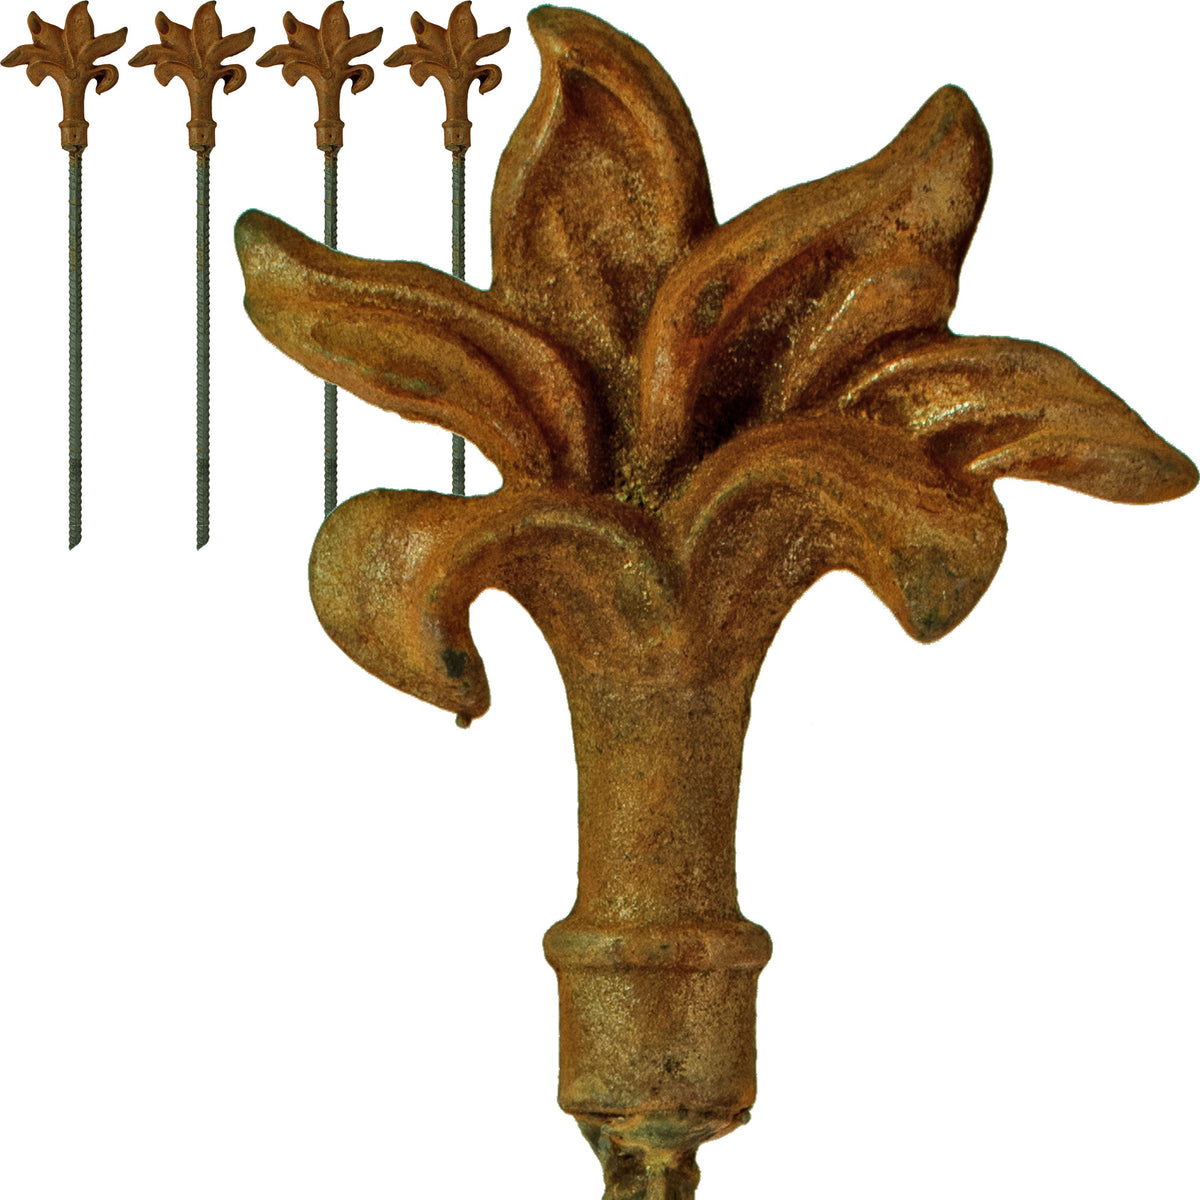 Introducing Lee Display's brand-new Garden Hose Stake Guides with the Fleur-De-Lis sold in a set of 4 stakes.